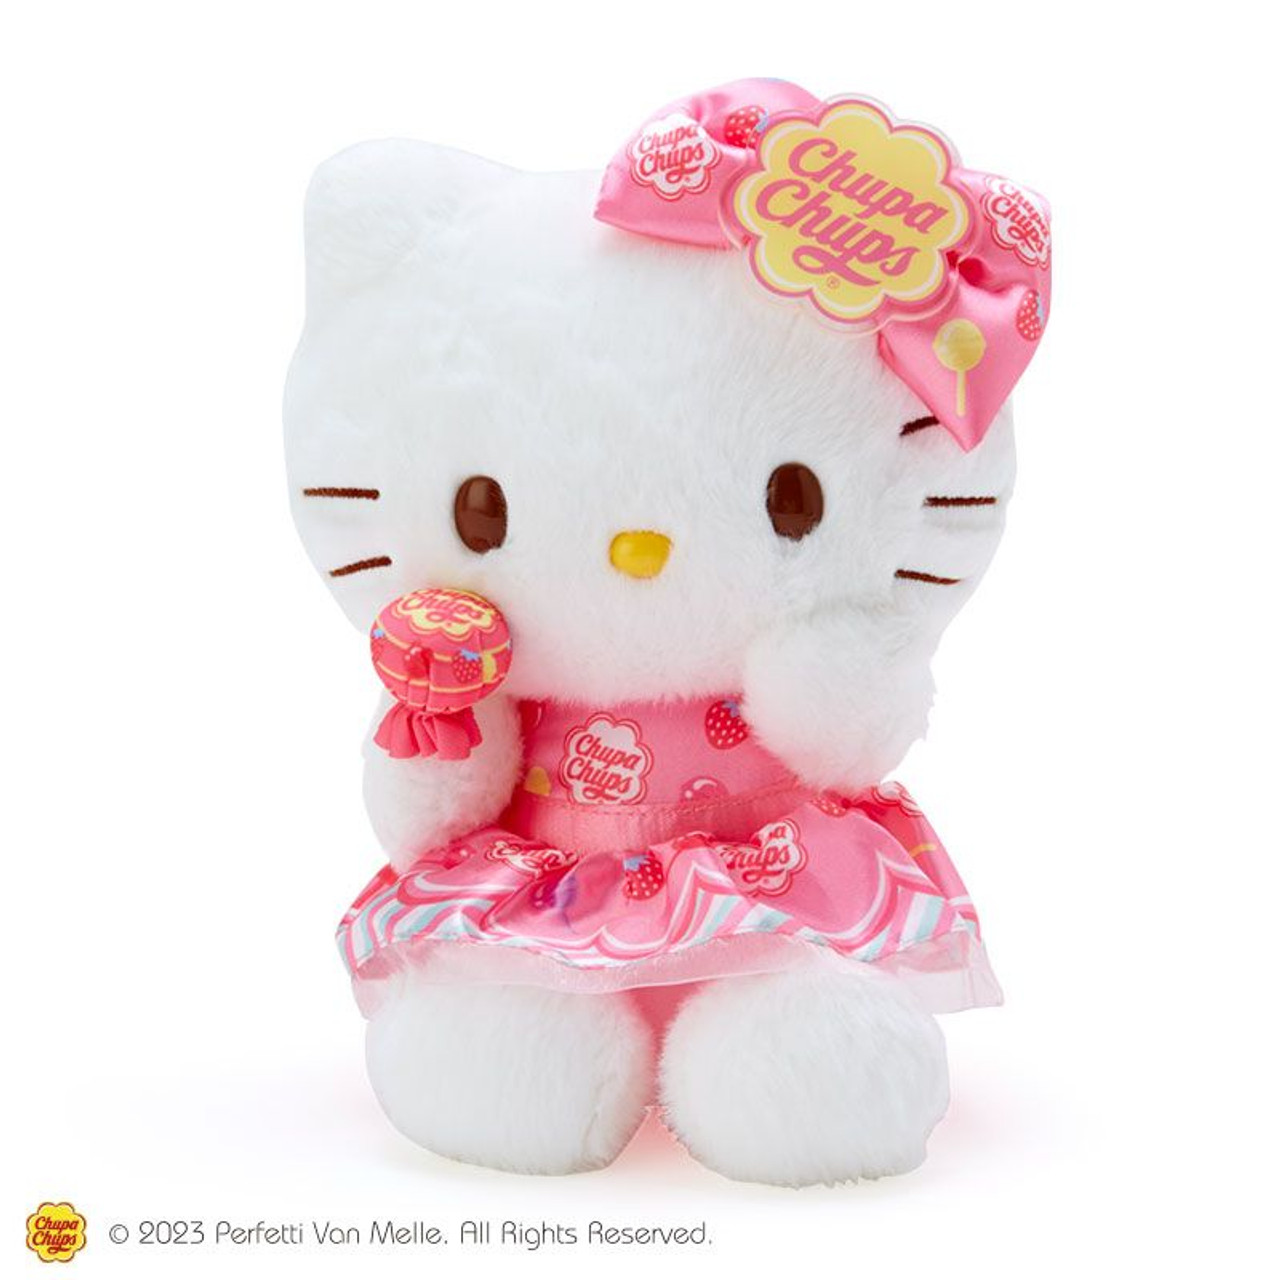 Hello Kitty - Accessoires pour figurines Nendoroid Doll Outfit